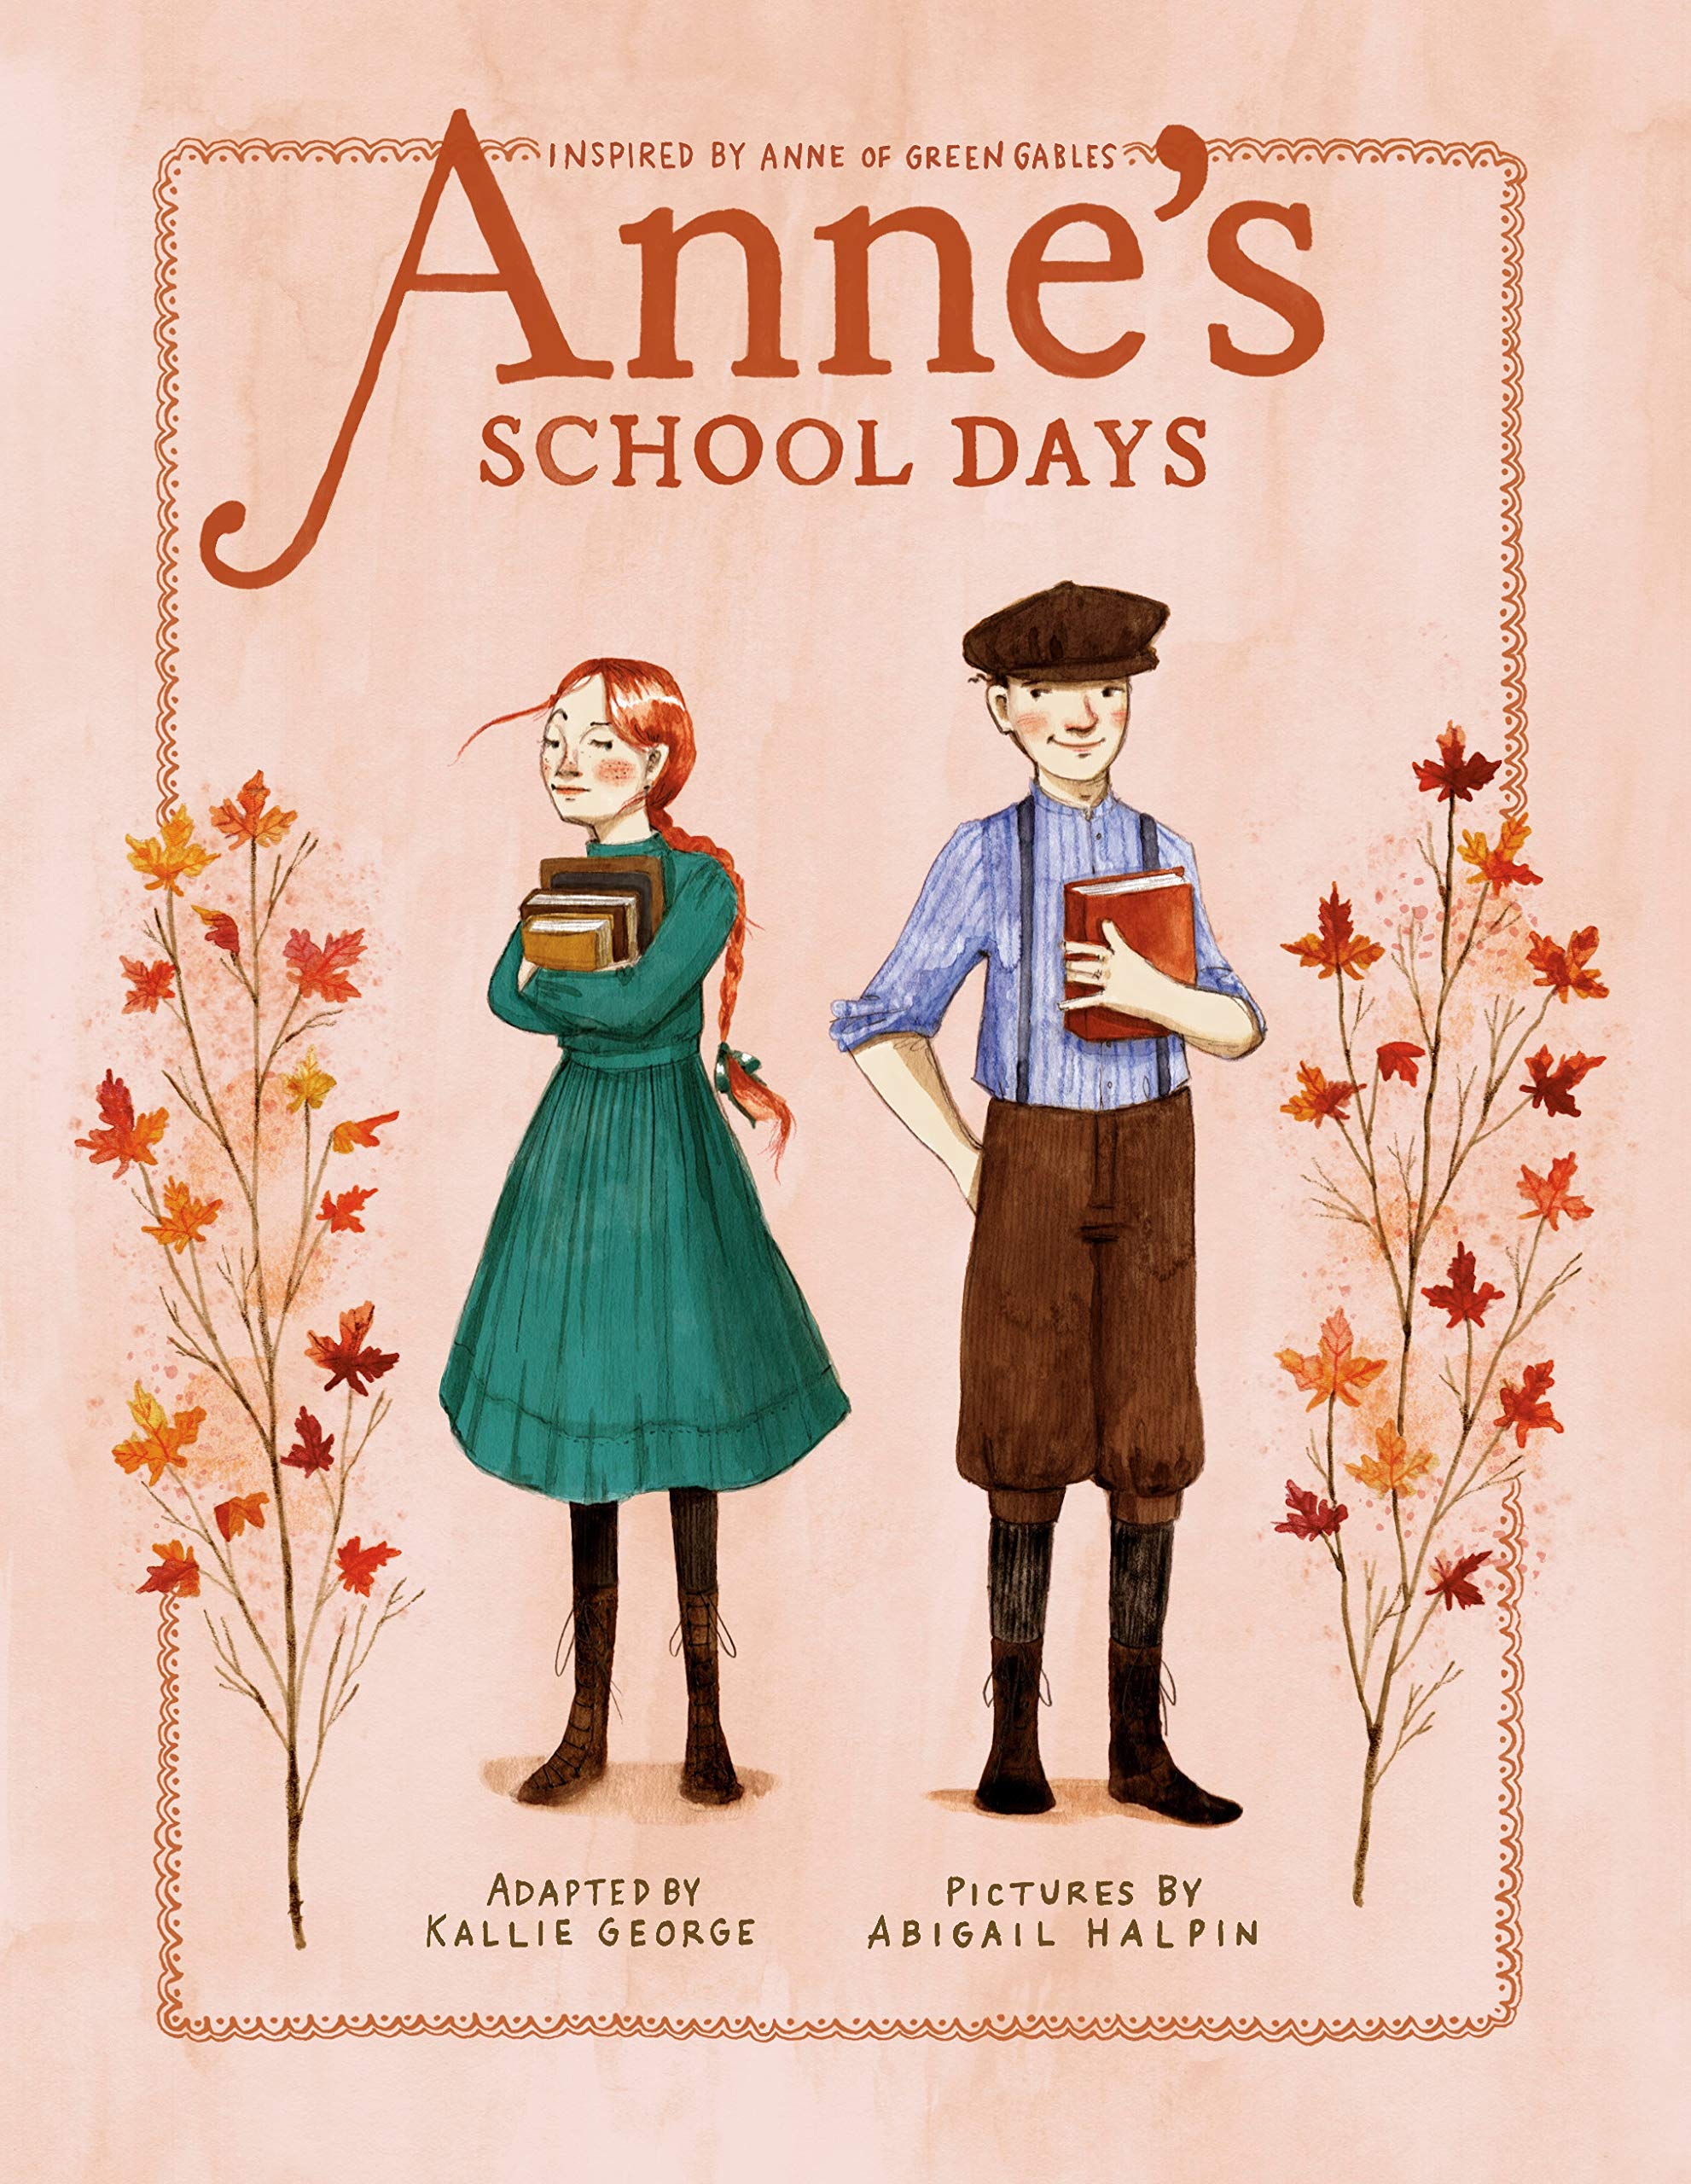 Anne's School Days: Inspired by Anne of Green Gables Hardcover  by Kallie George  (Author), Abigail Halpin (Illustrator)